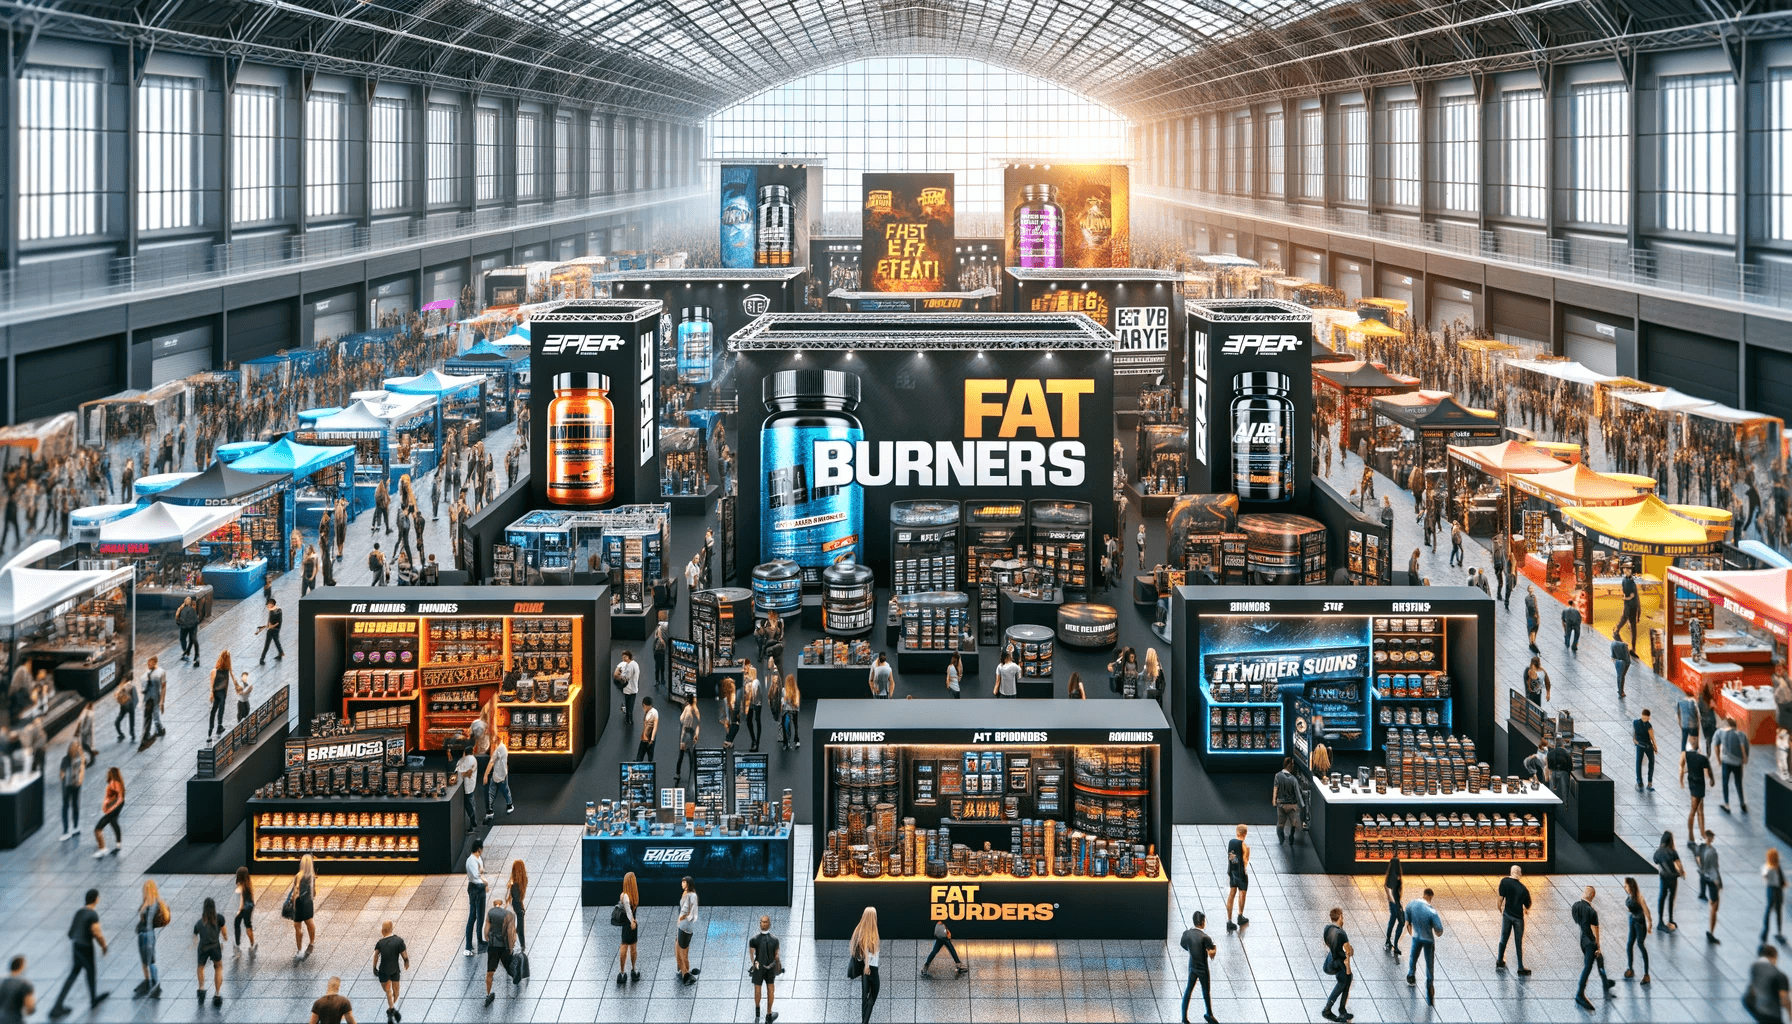 A bustling fitness expo with various booths promoting different types of fat burners, capturing the industry's diversity